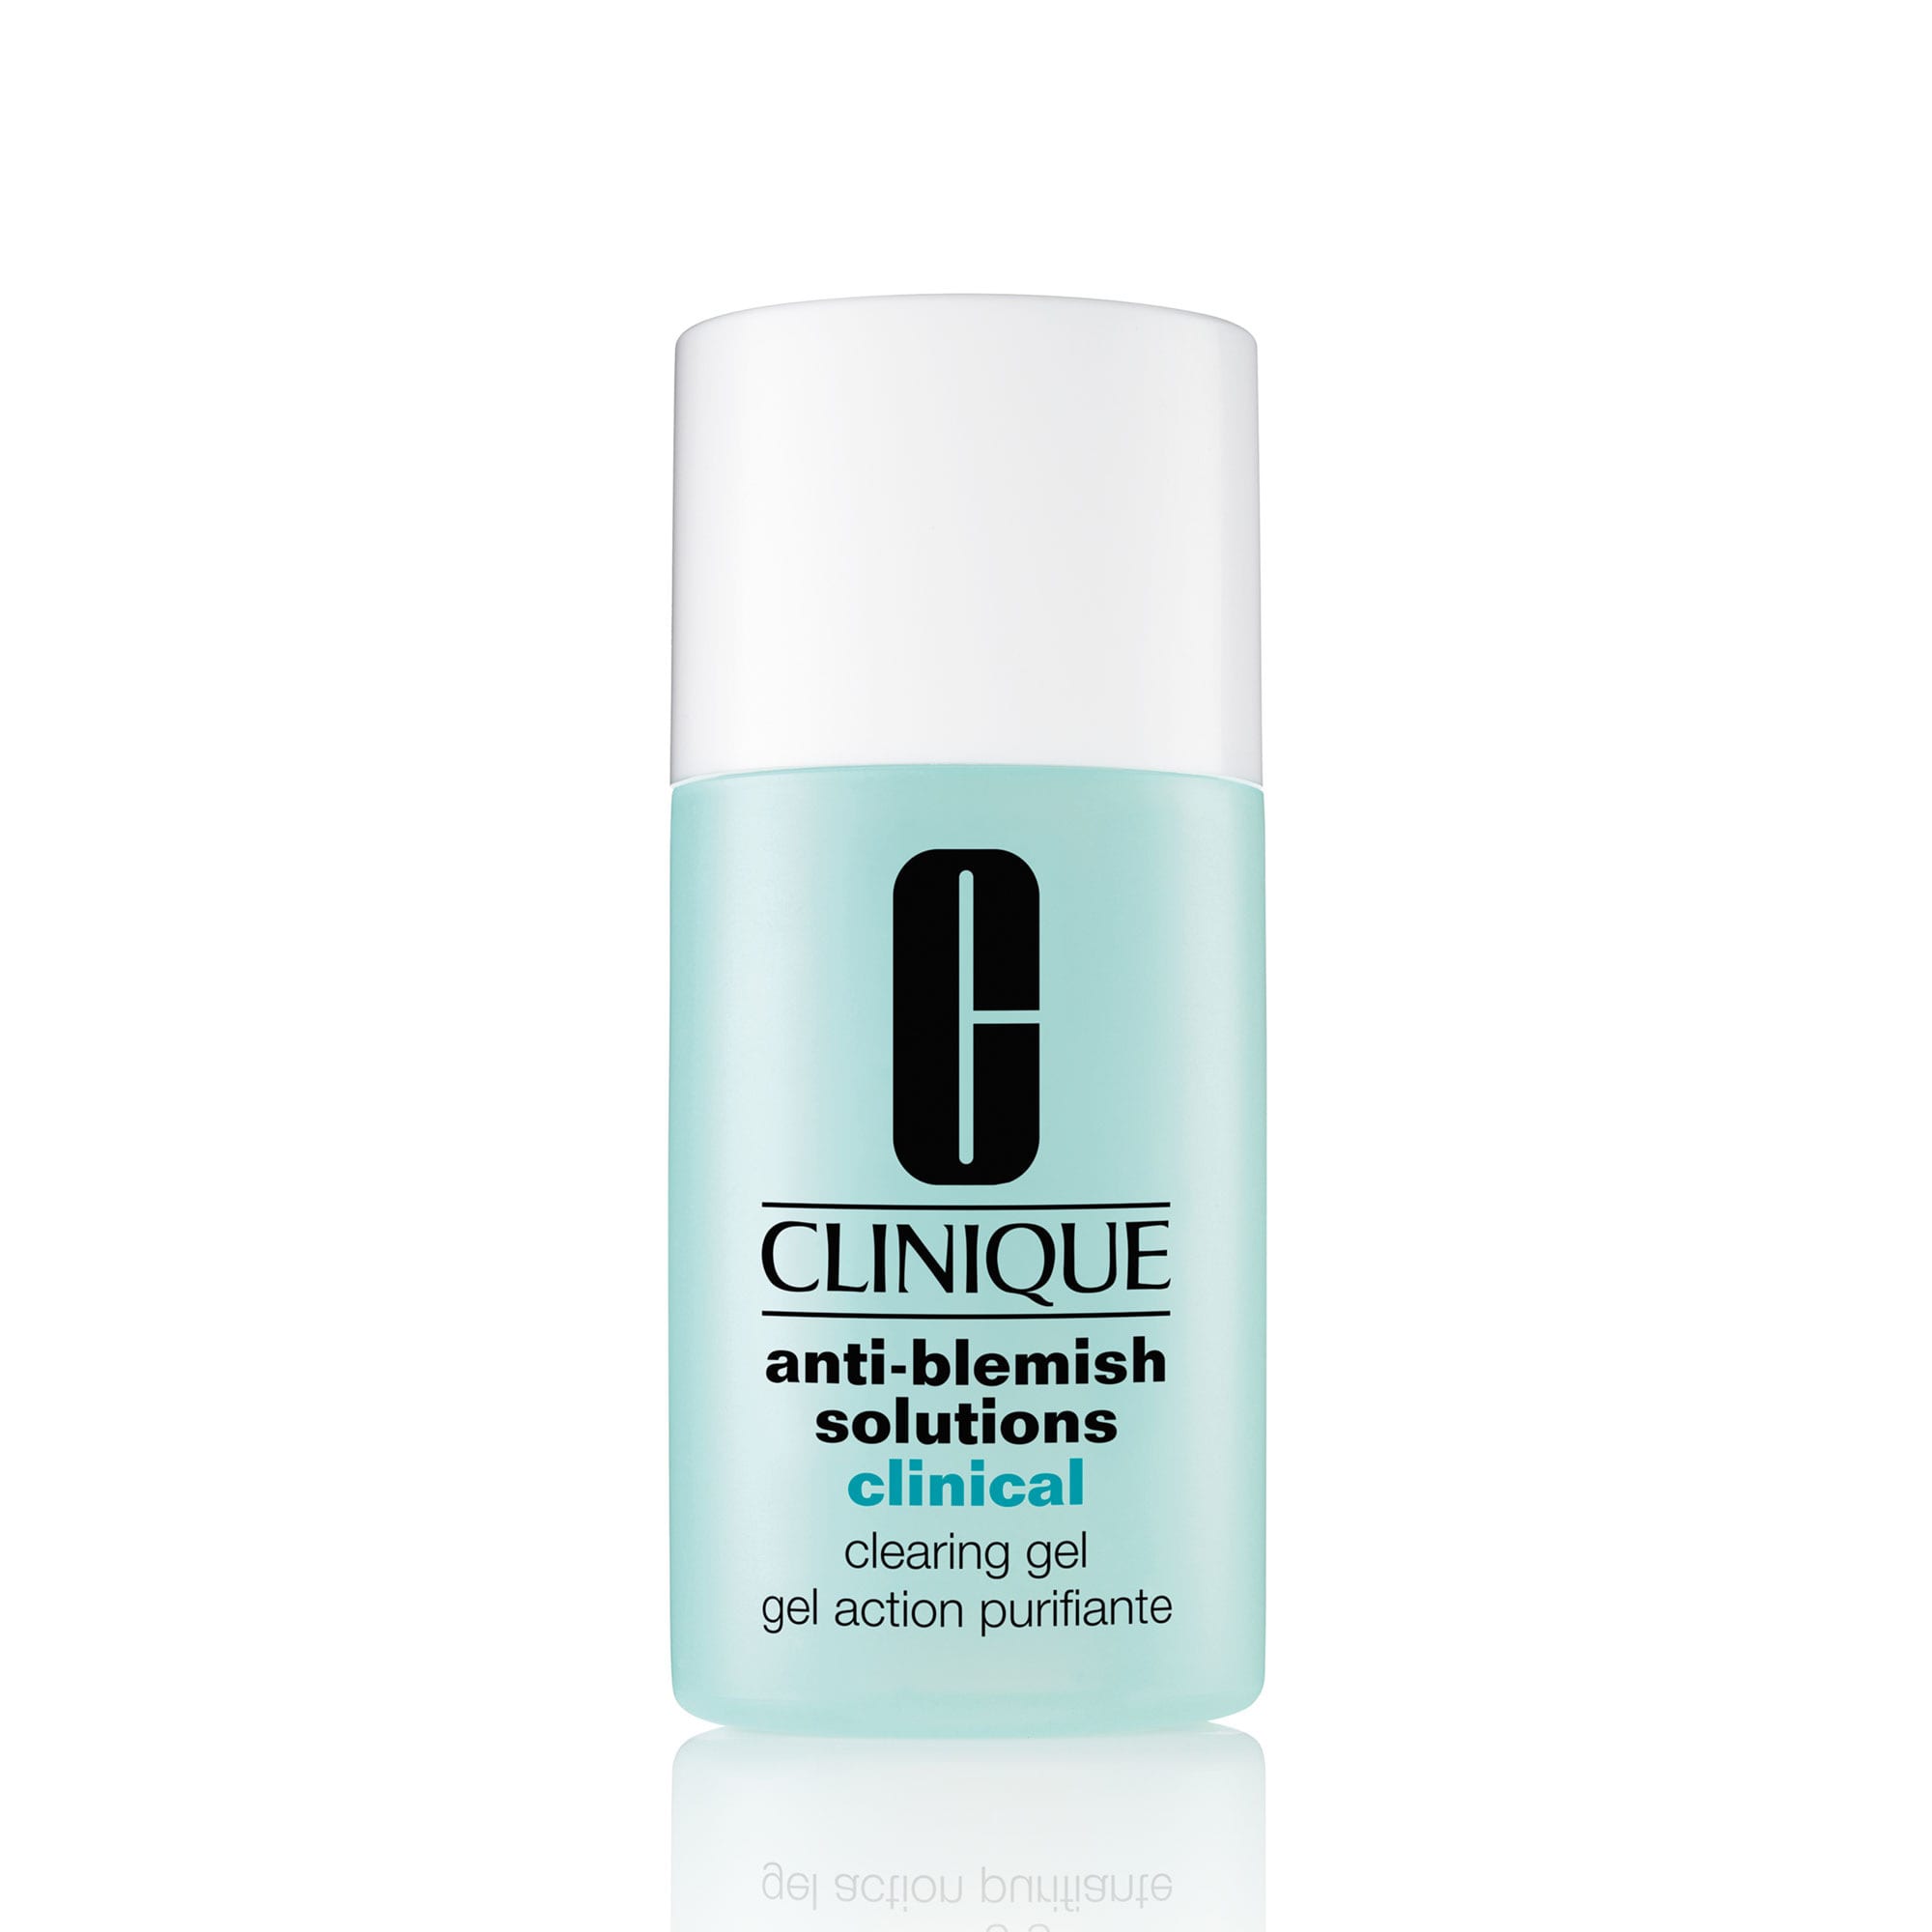 Anti-Blemish Solutions Clinical Clearing Gel från Clinique